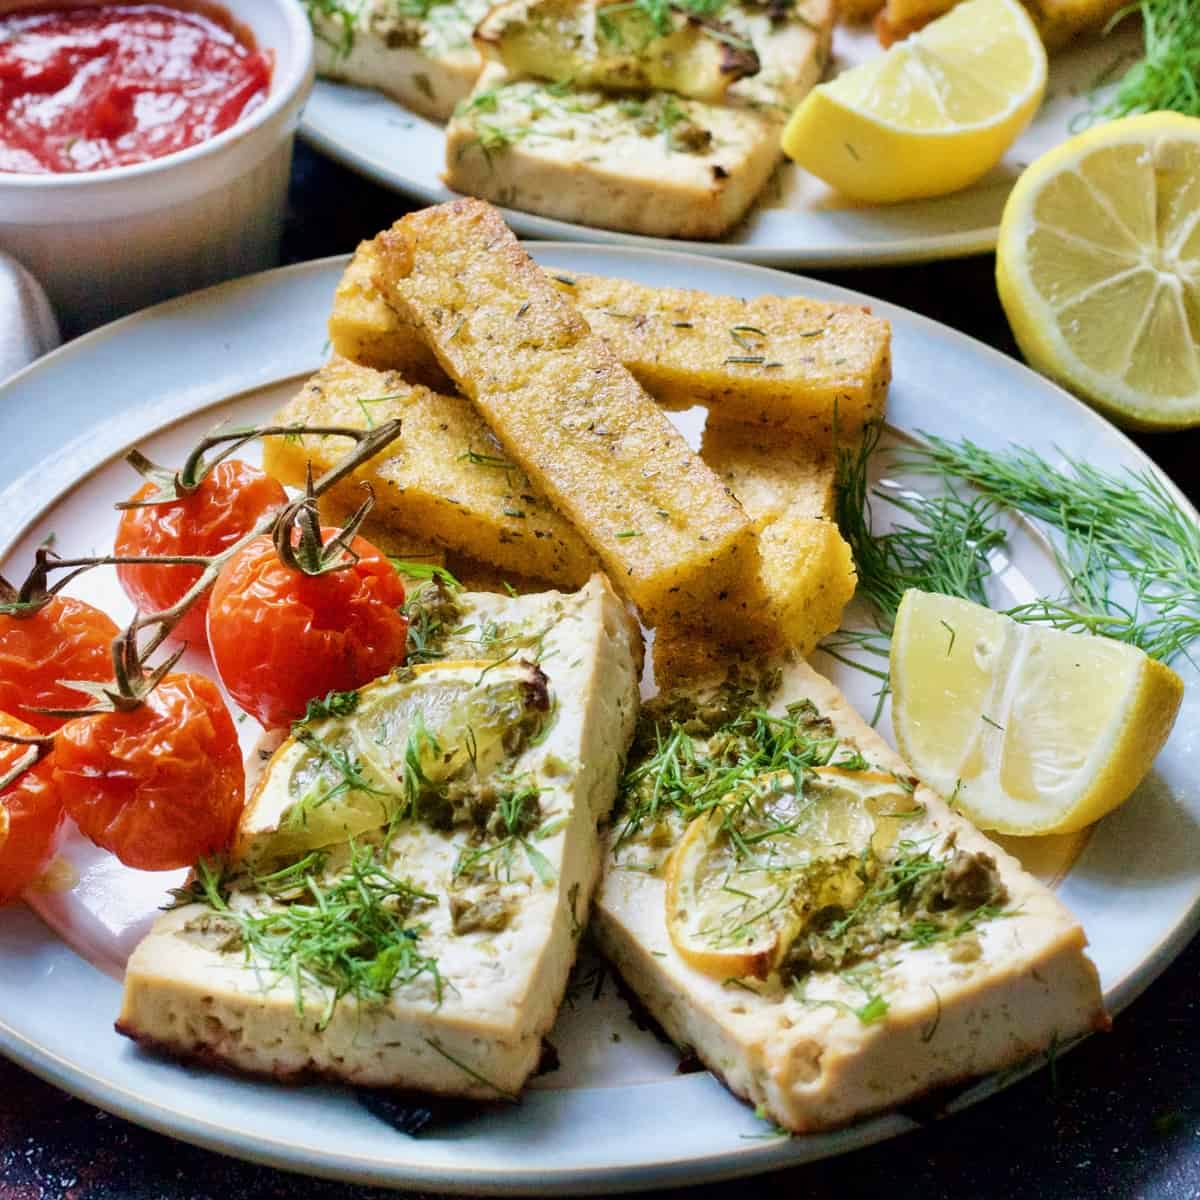 Two slices of tofu fish, polenta chips and roasted tomatoes.